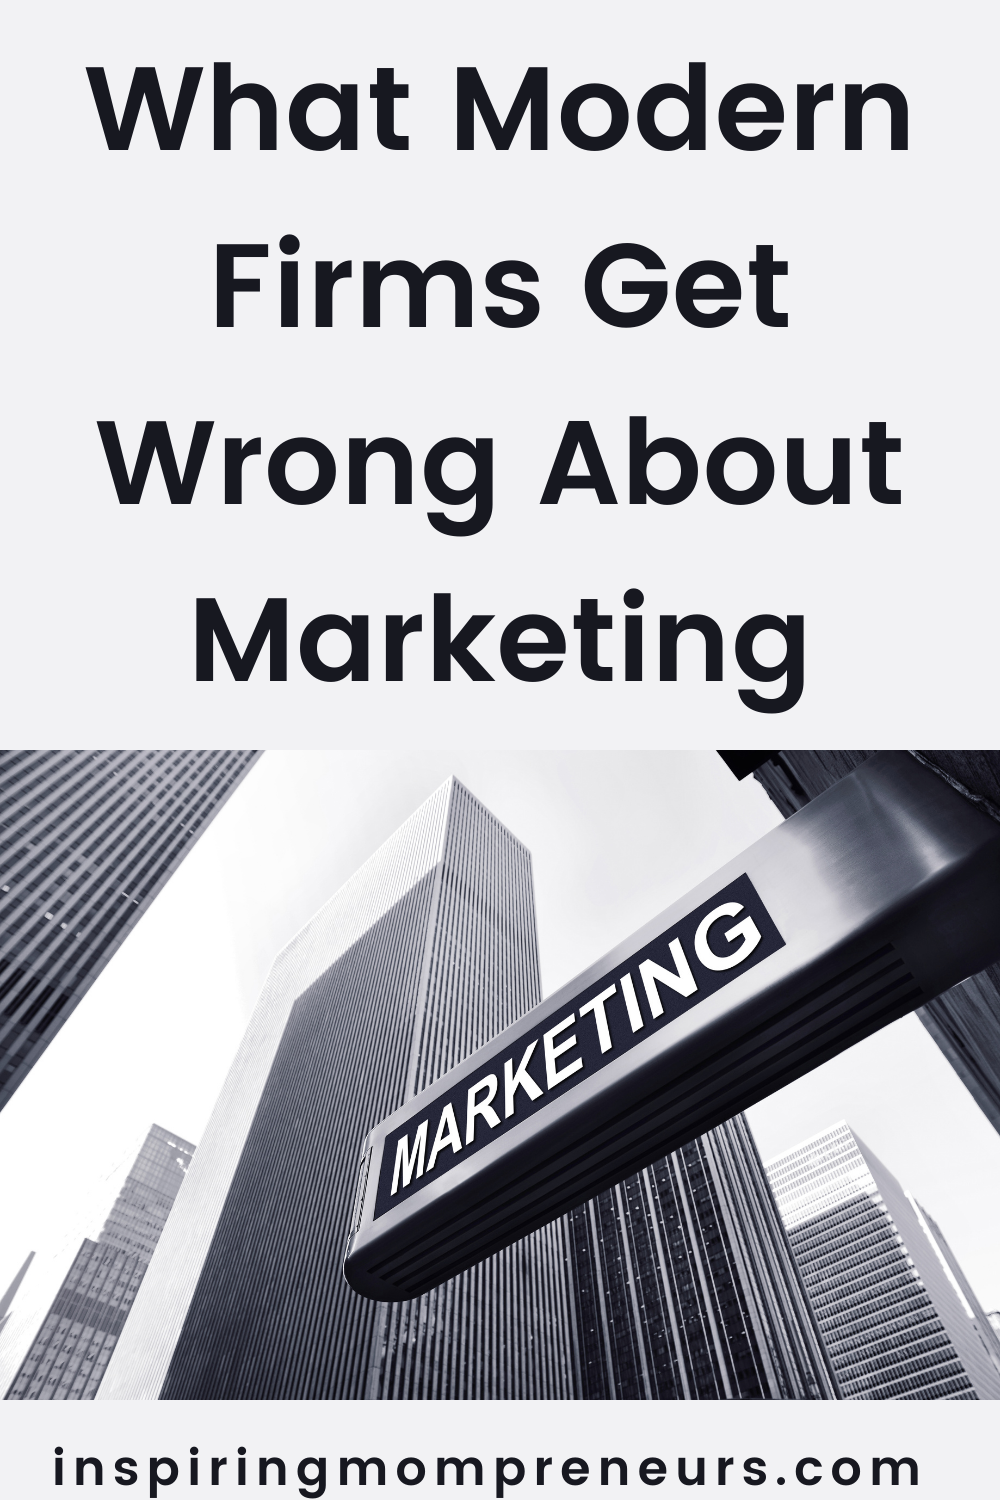 Some companies may not truly understand how to leverage the latest marketing trends to their benefit. This is what modern firms get wrong about marketing.